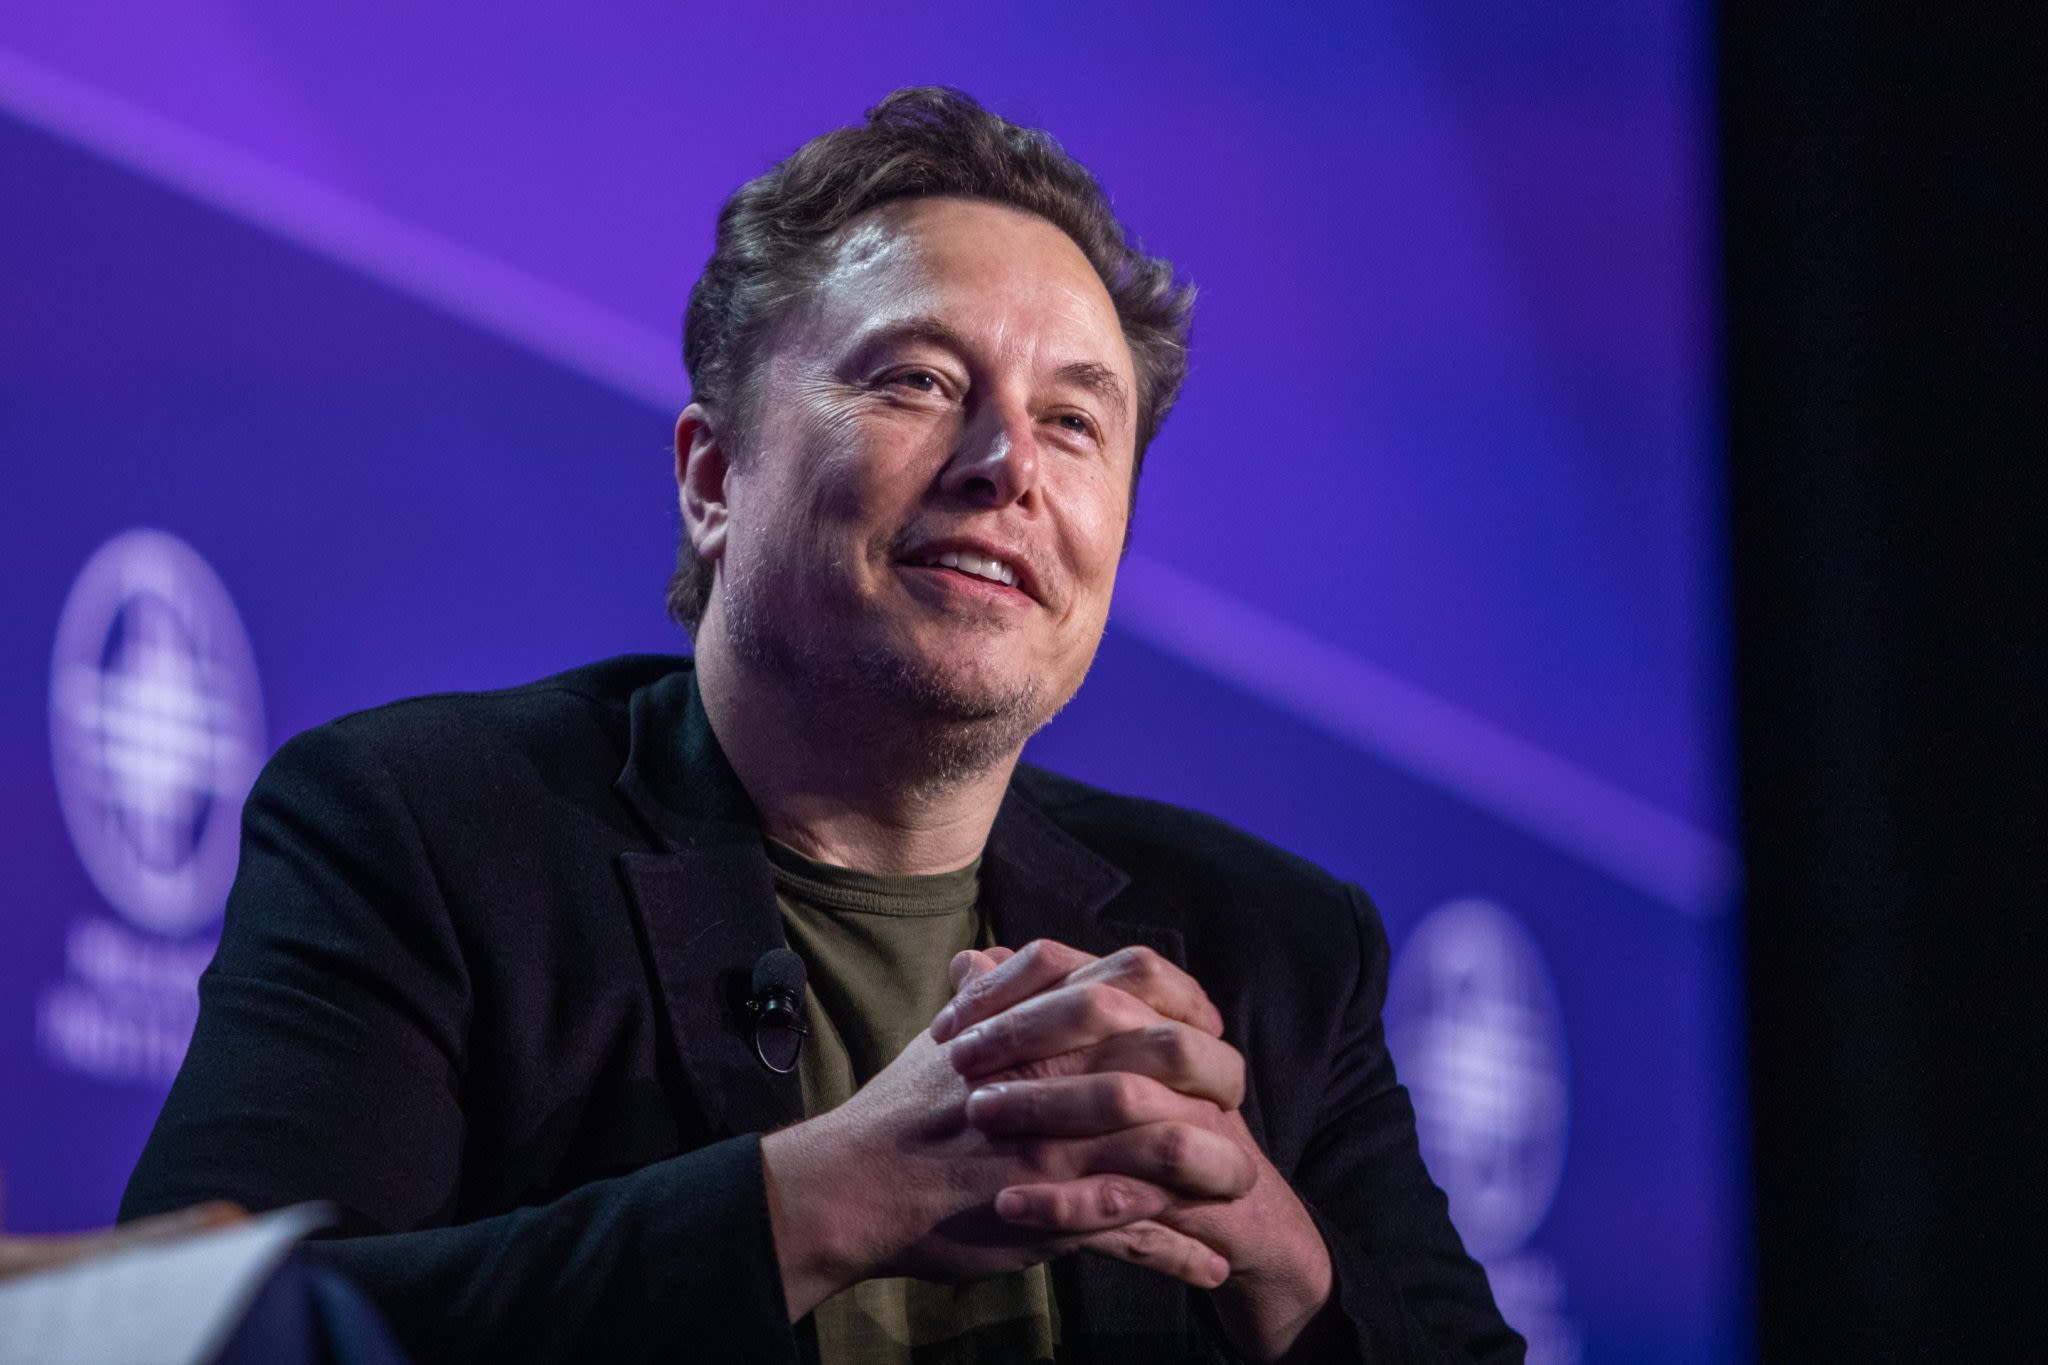 Elon Musk could bring home $56 billion after a historic pay vote. His compensation completely dwarfs the biggest paydays in corporate America